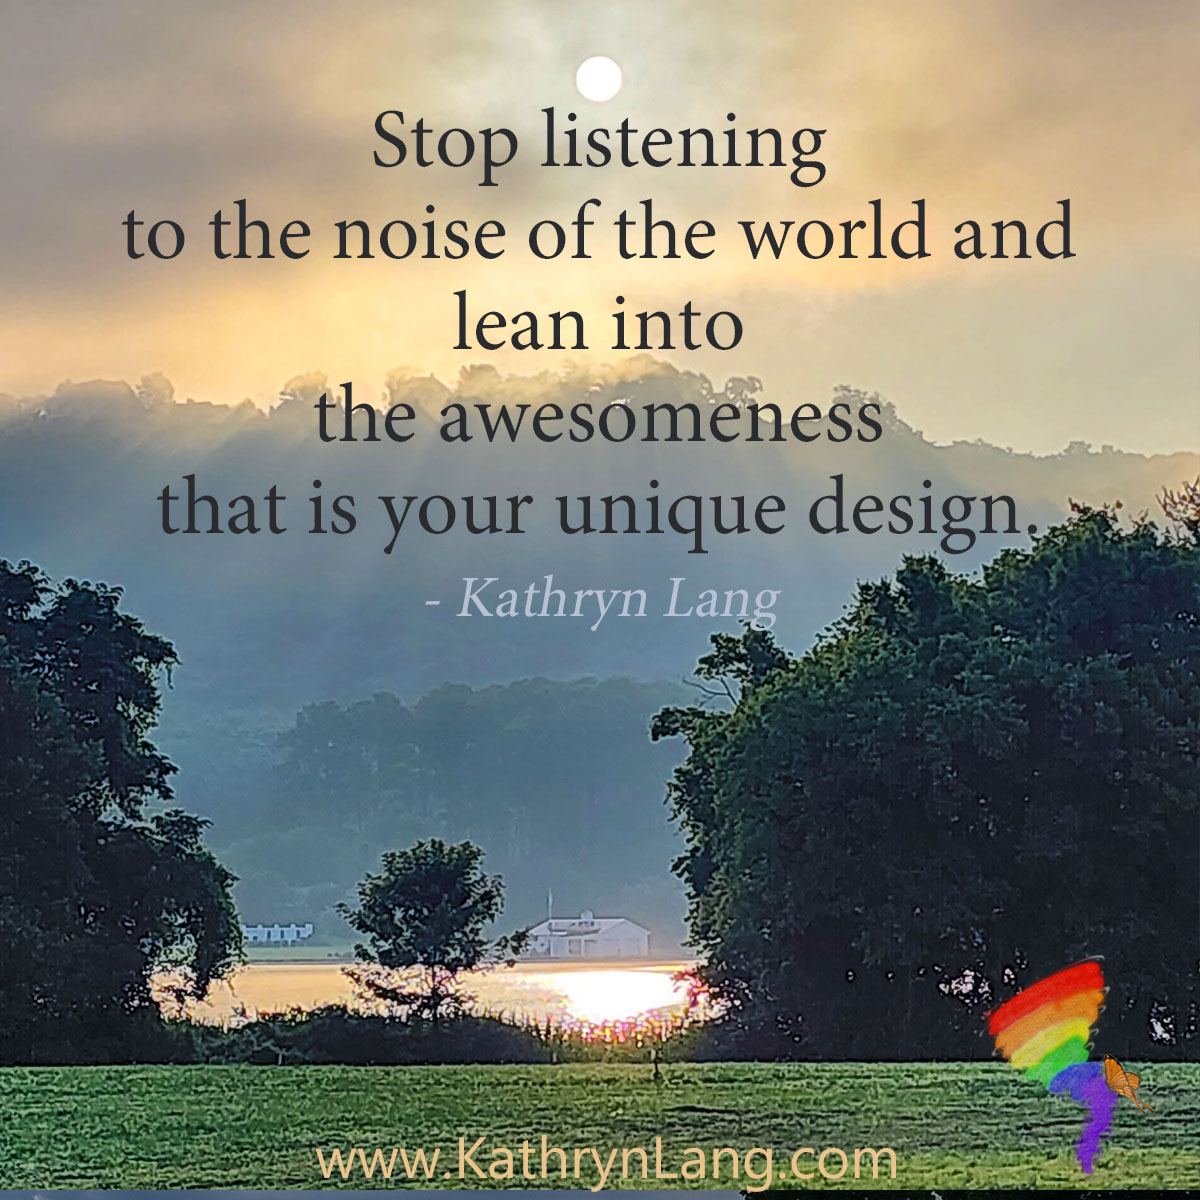 #QuoteoftheDay

Stop listening to the noise of the world and lean into the awesomeness that is your unique design.
- Kathryn Lang